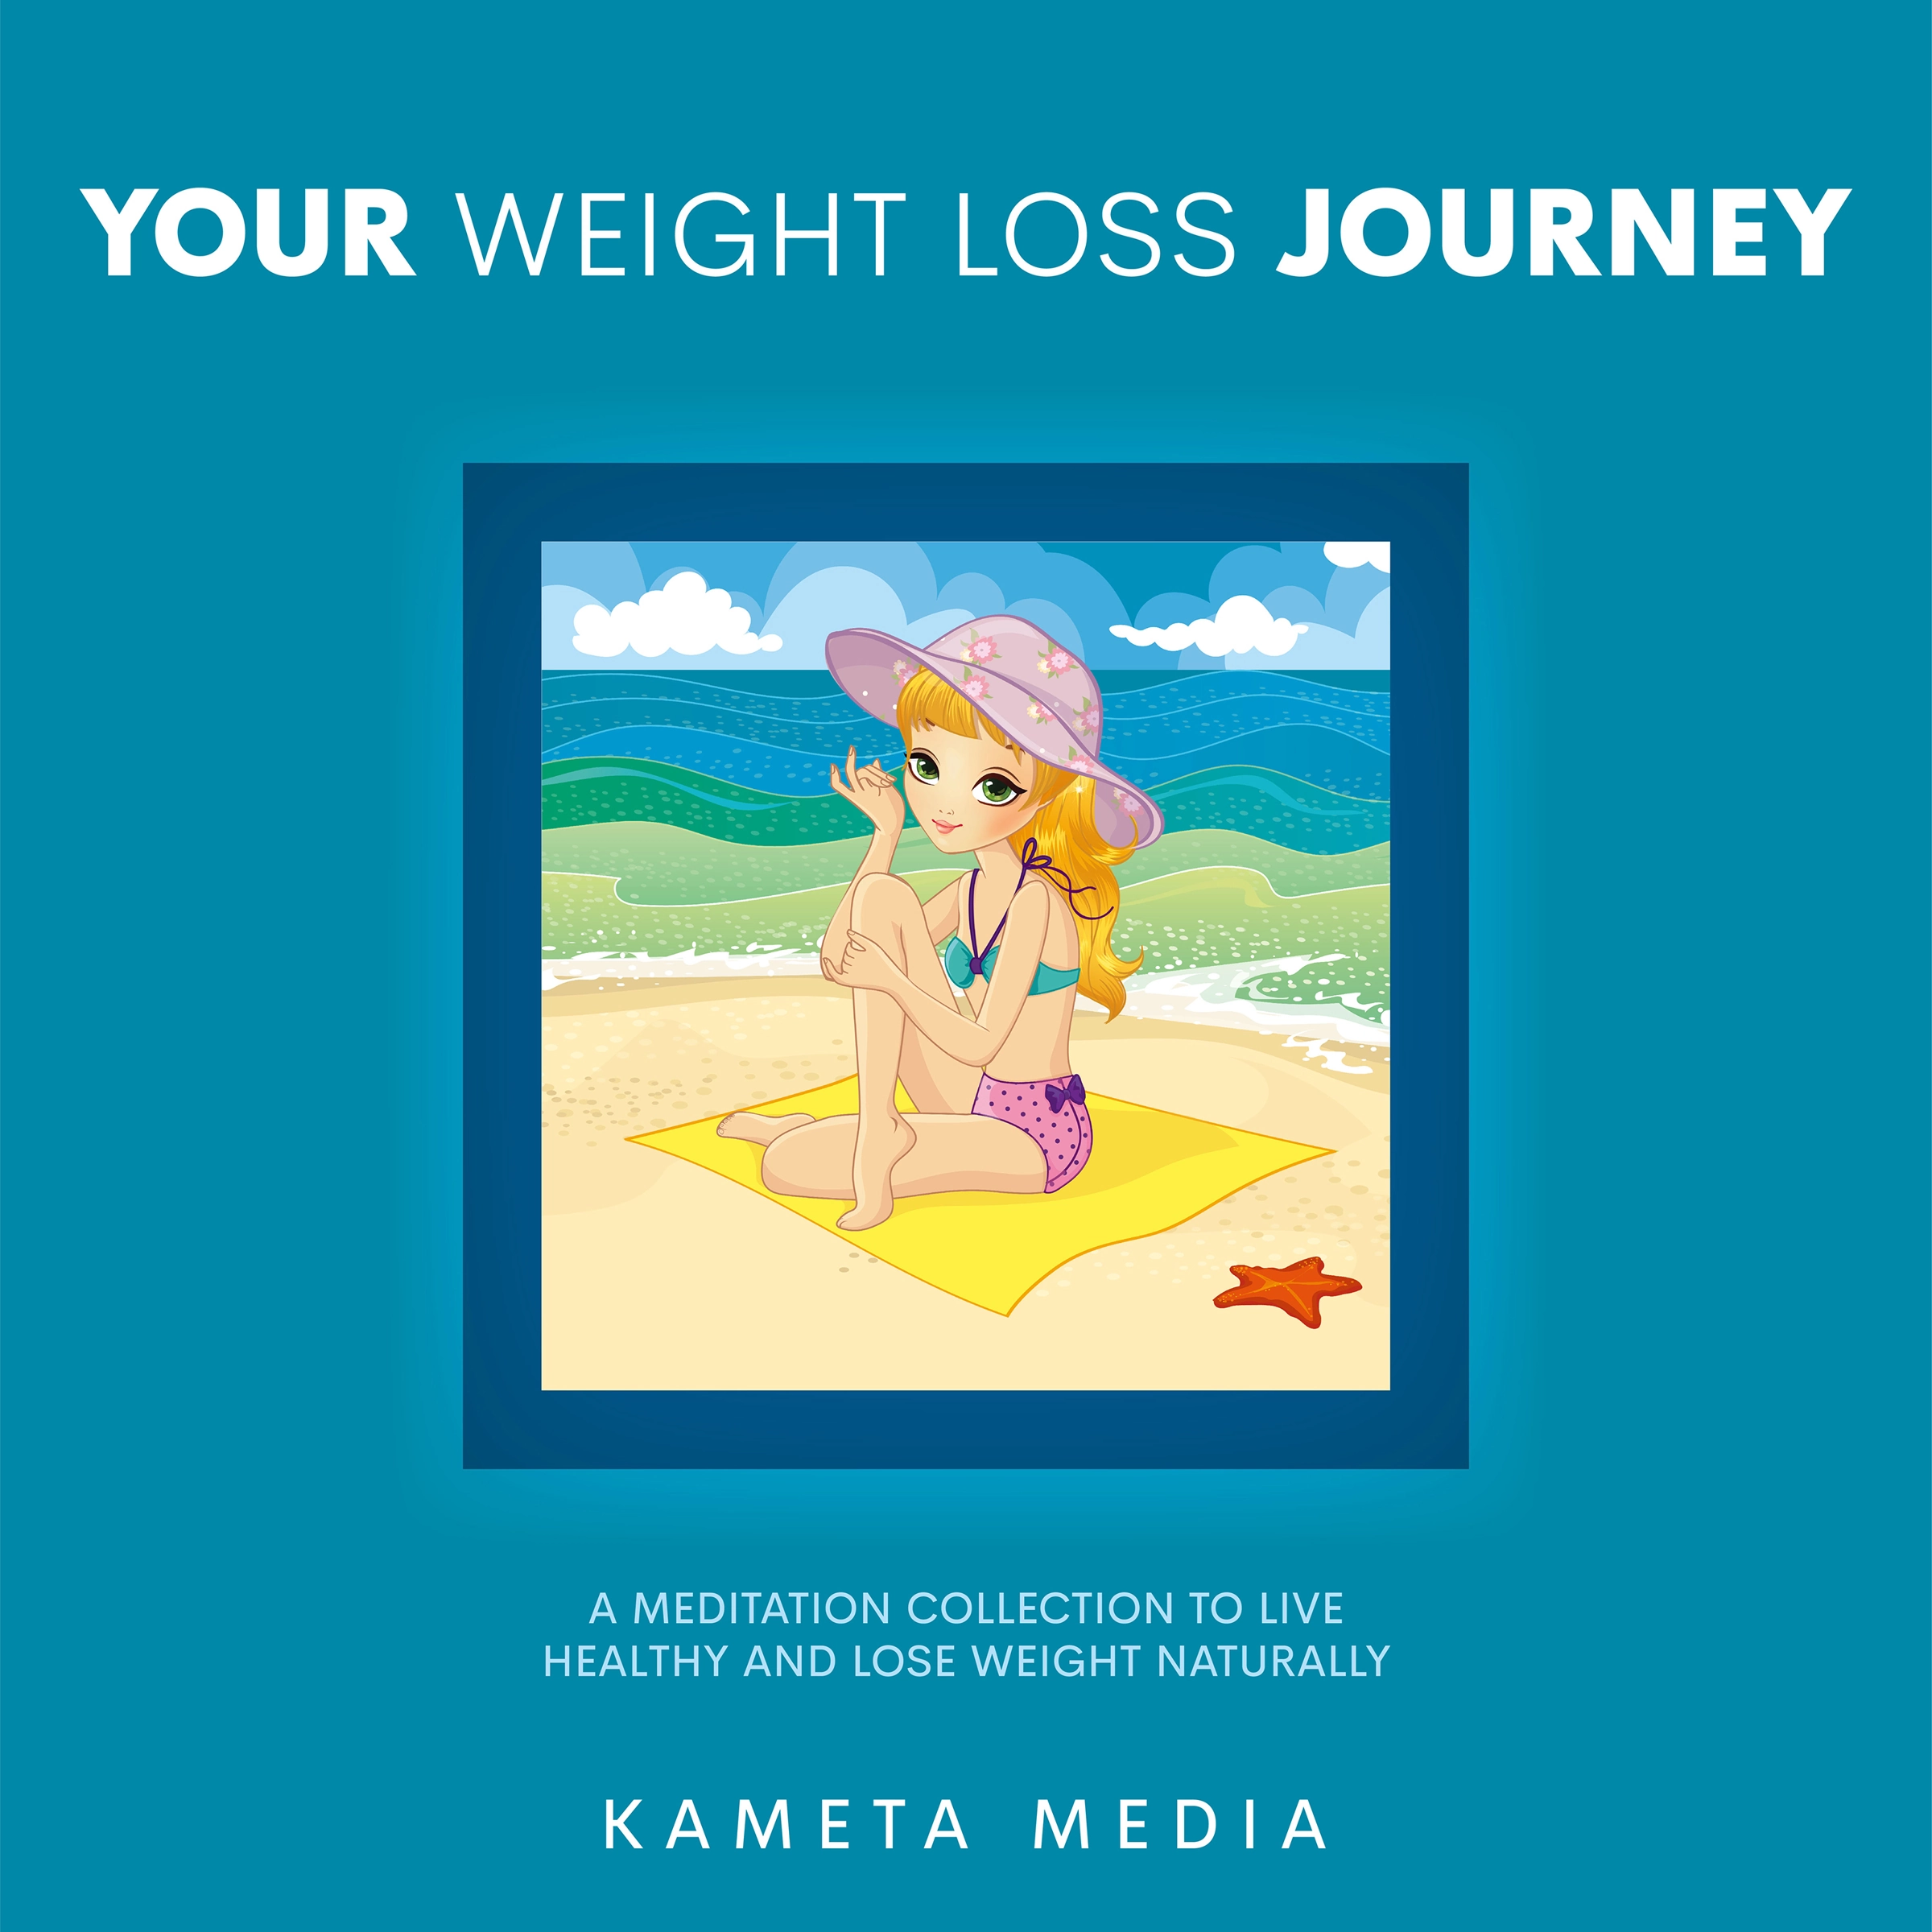 Your Weight Loss Journey: A Meditation Collection to Live Healthy and Lose Weight Naturally Audiobook by Kameta Media